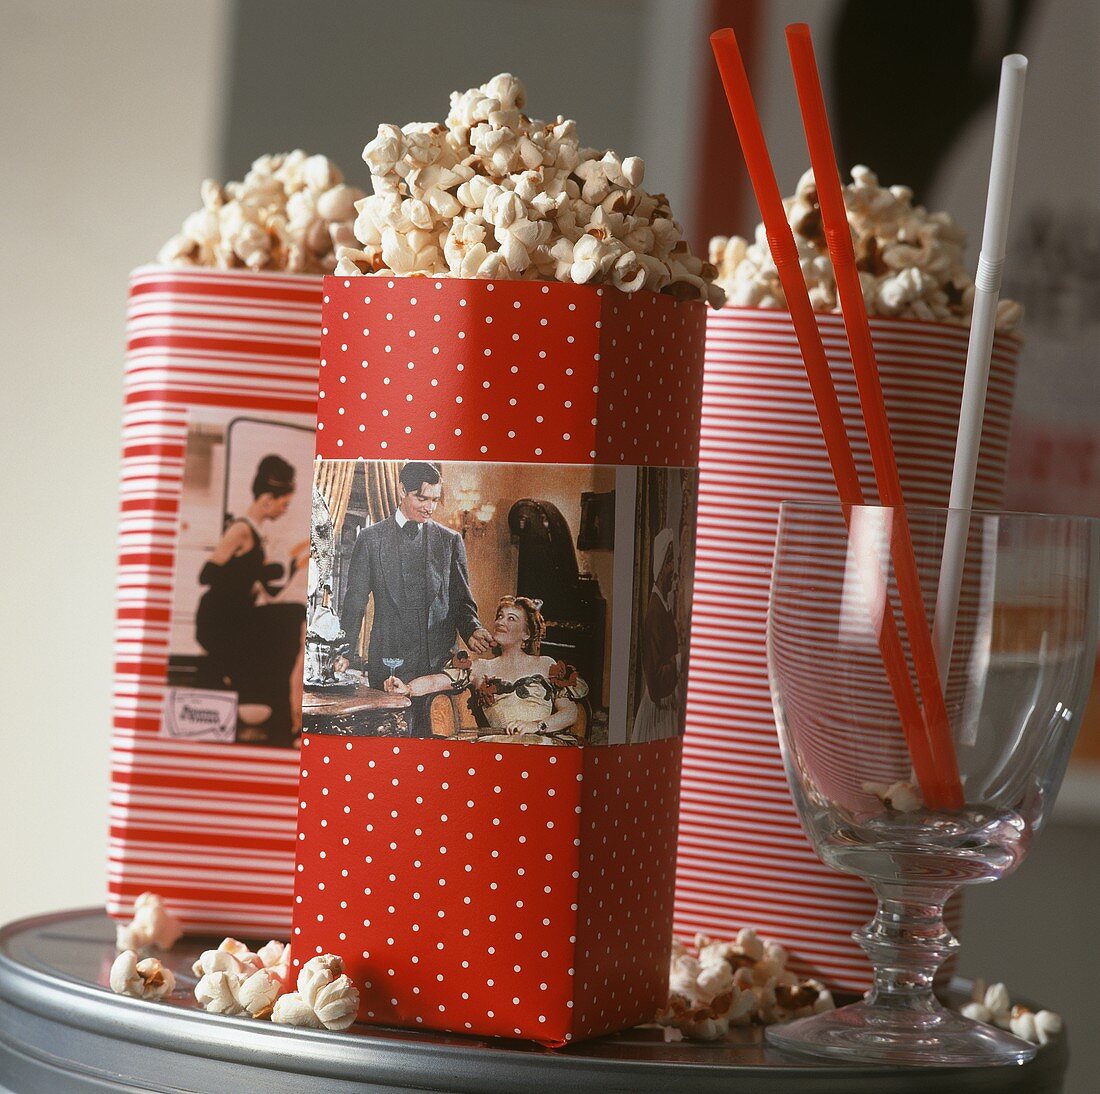 Popcorn in paper bags with cinema motifs